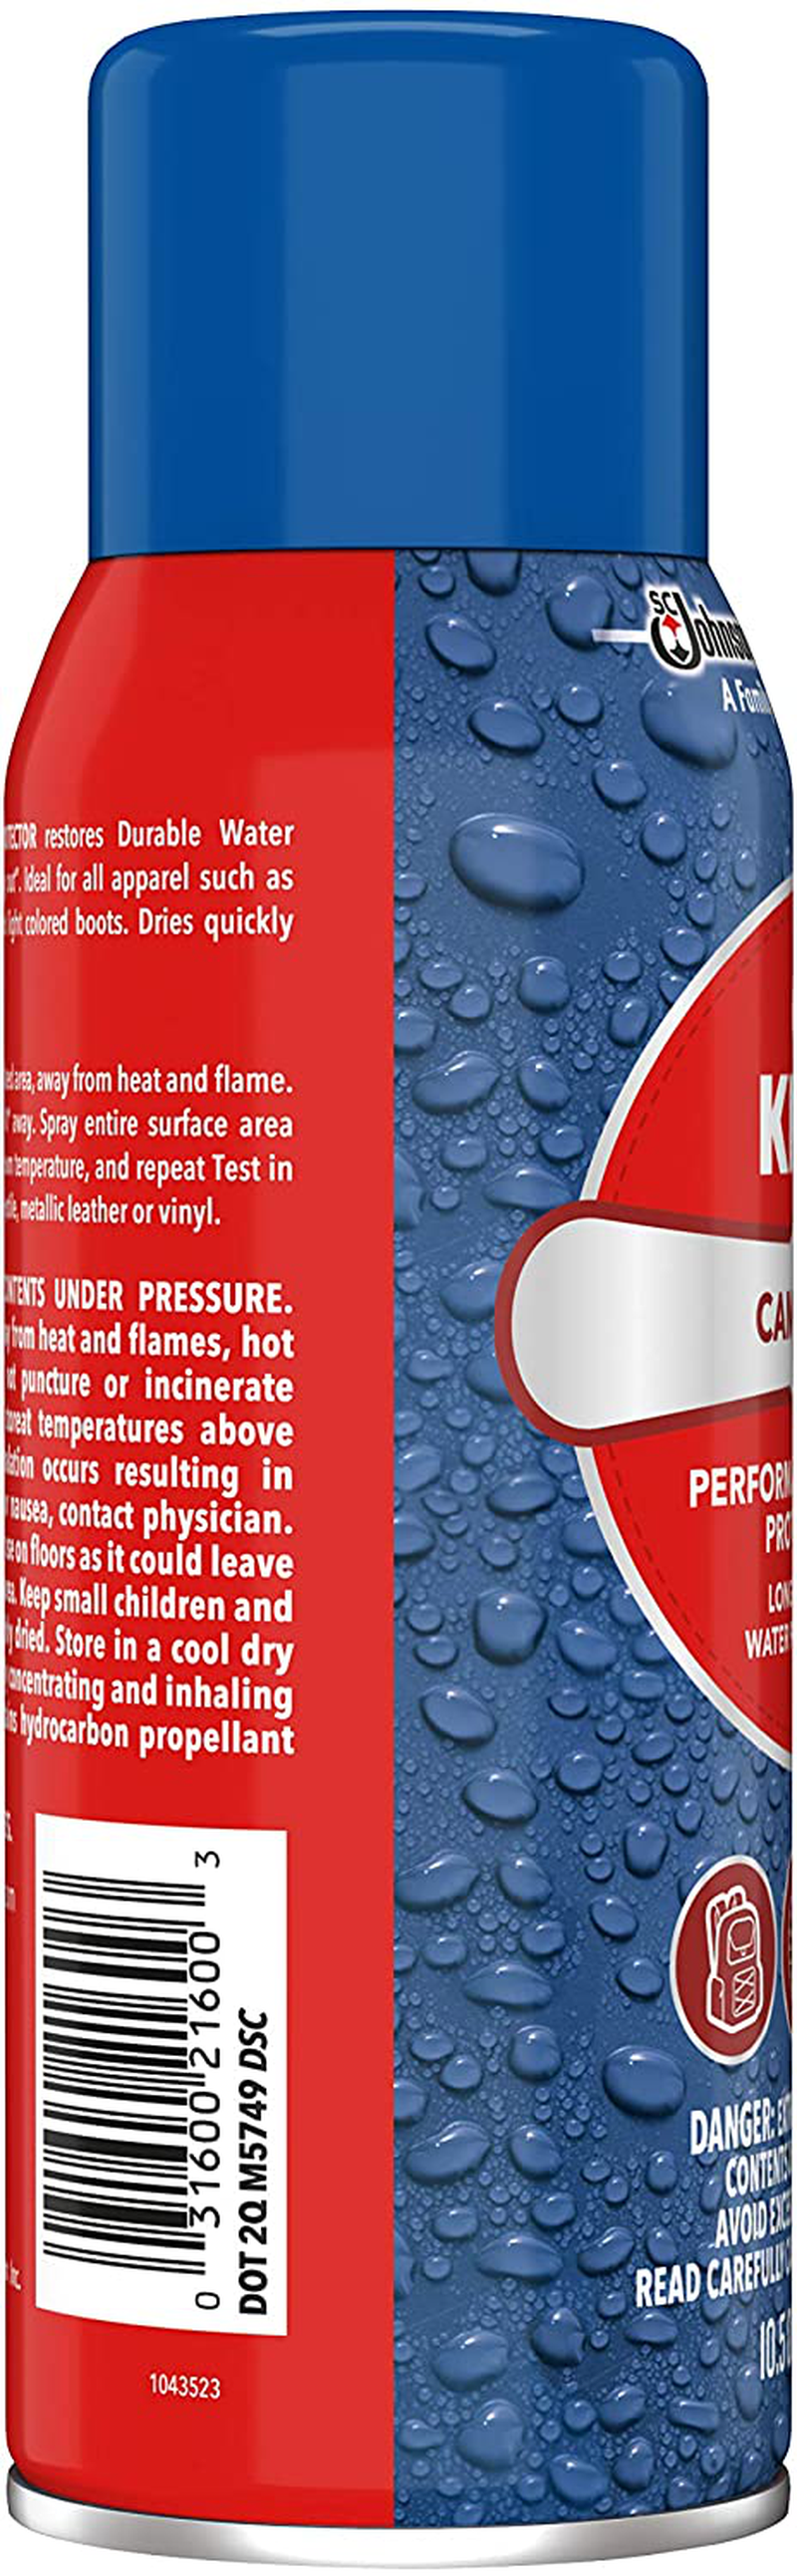 KIWI Camp Dry Performance Fabric Protector Spray - Restores Water Repellent and Provides Fabric Protection (1 Aerosol), 10.5 Oz Sporting Goods > Outdoor Recreation > Camping & Hiking > Camp Furniture Kiwi   